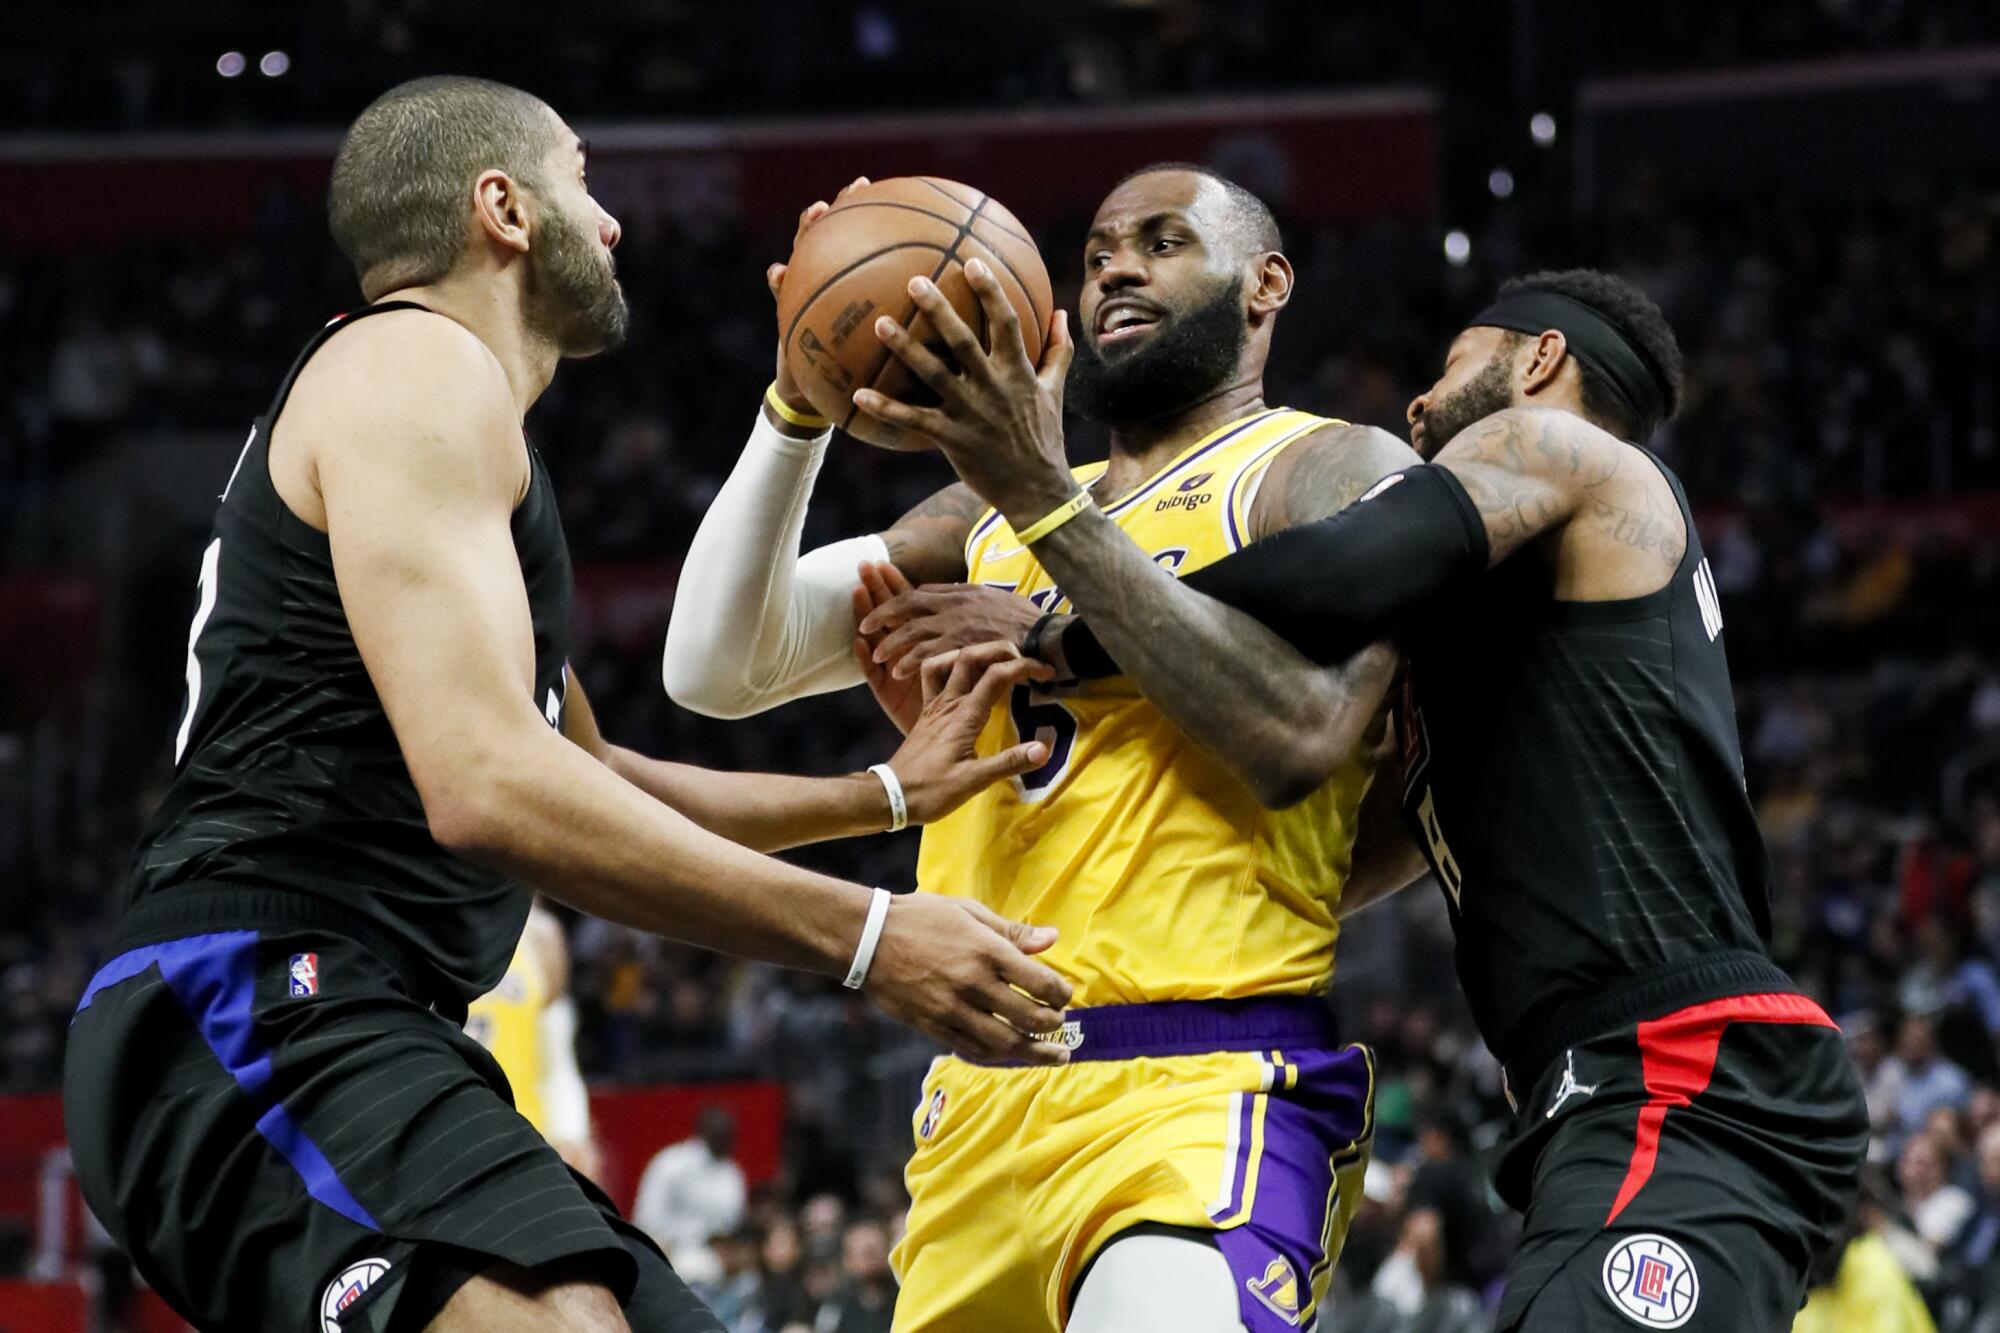 Lakers forward LeBron James gets tangled with Clippers forward Marcus Morris Sr.